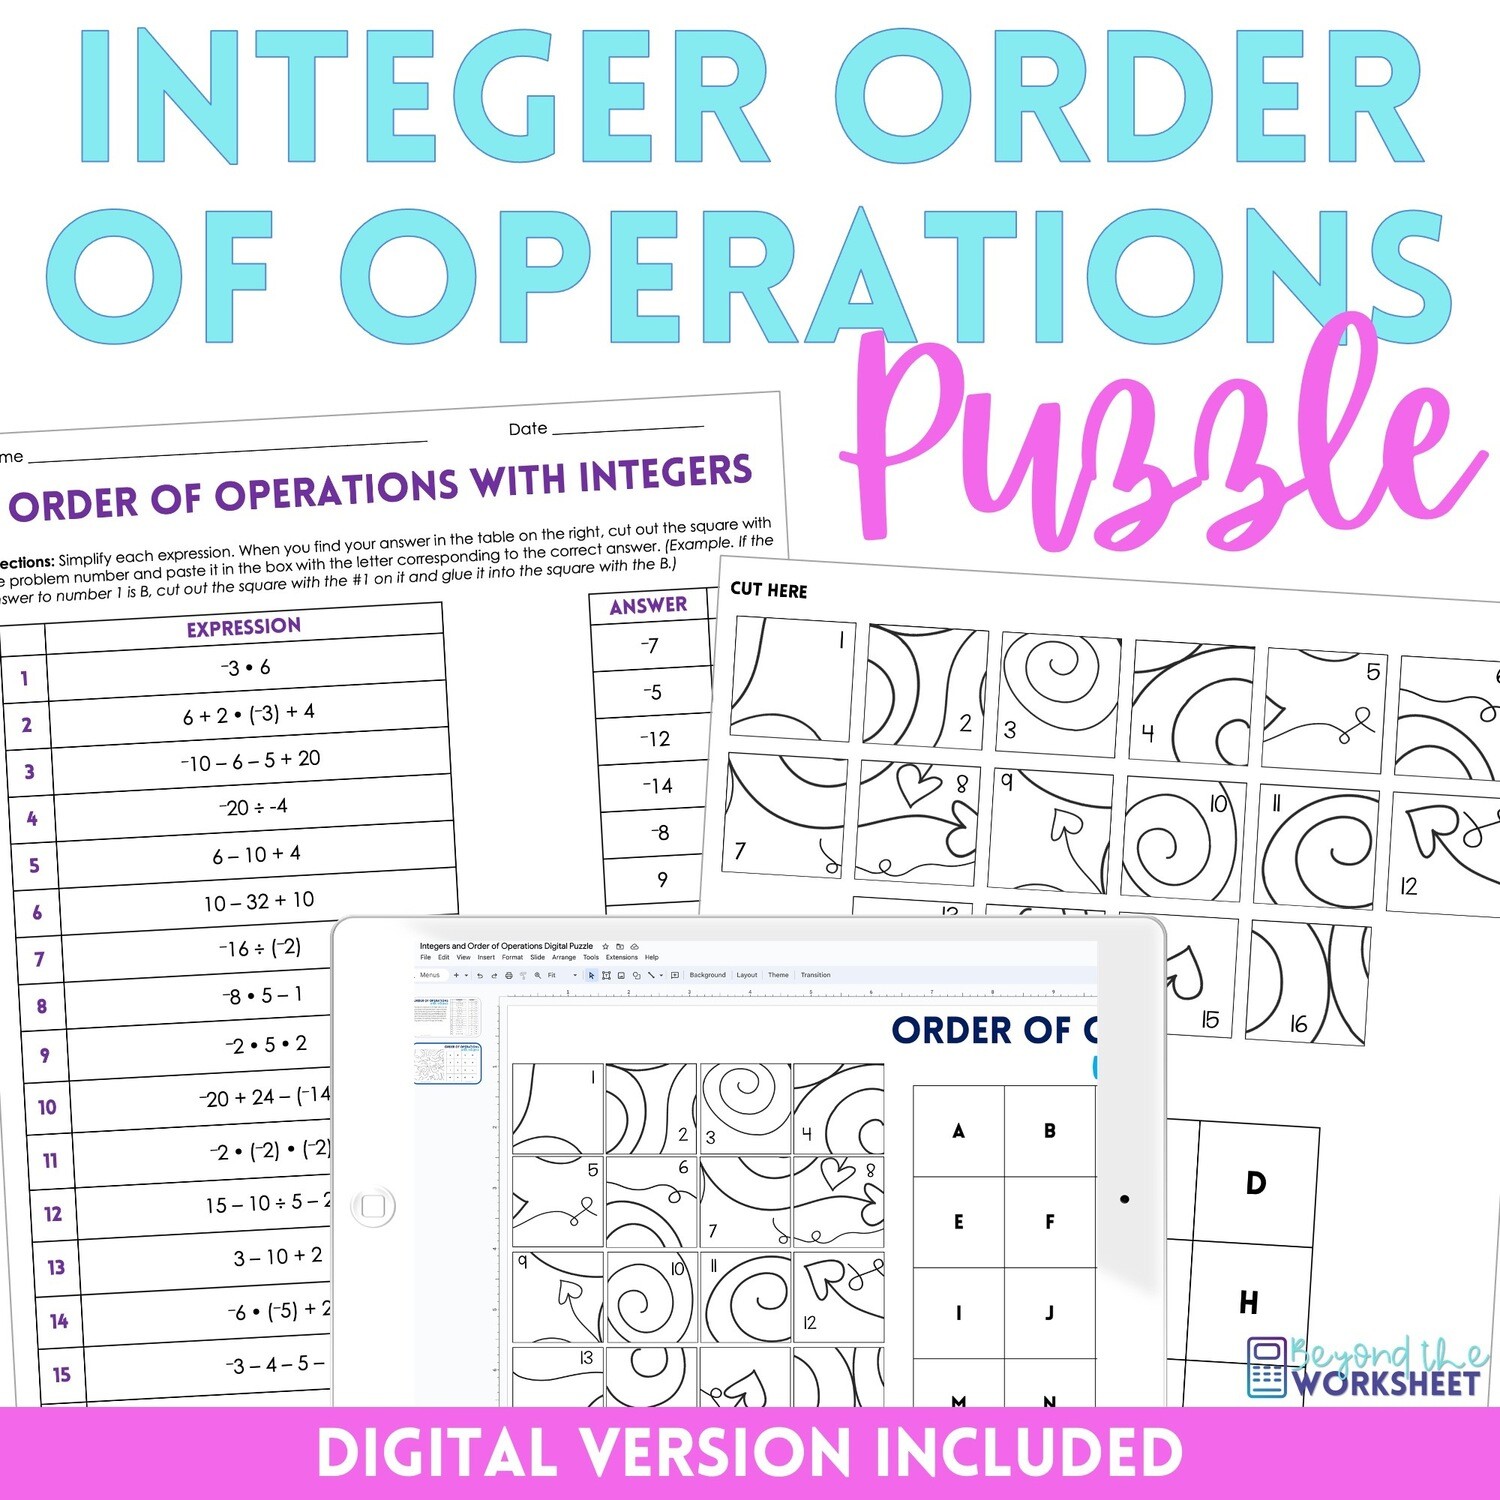 Order of Operations with Integers Puzzle